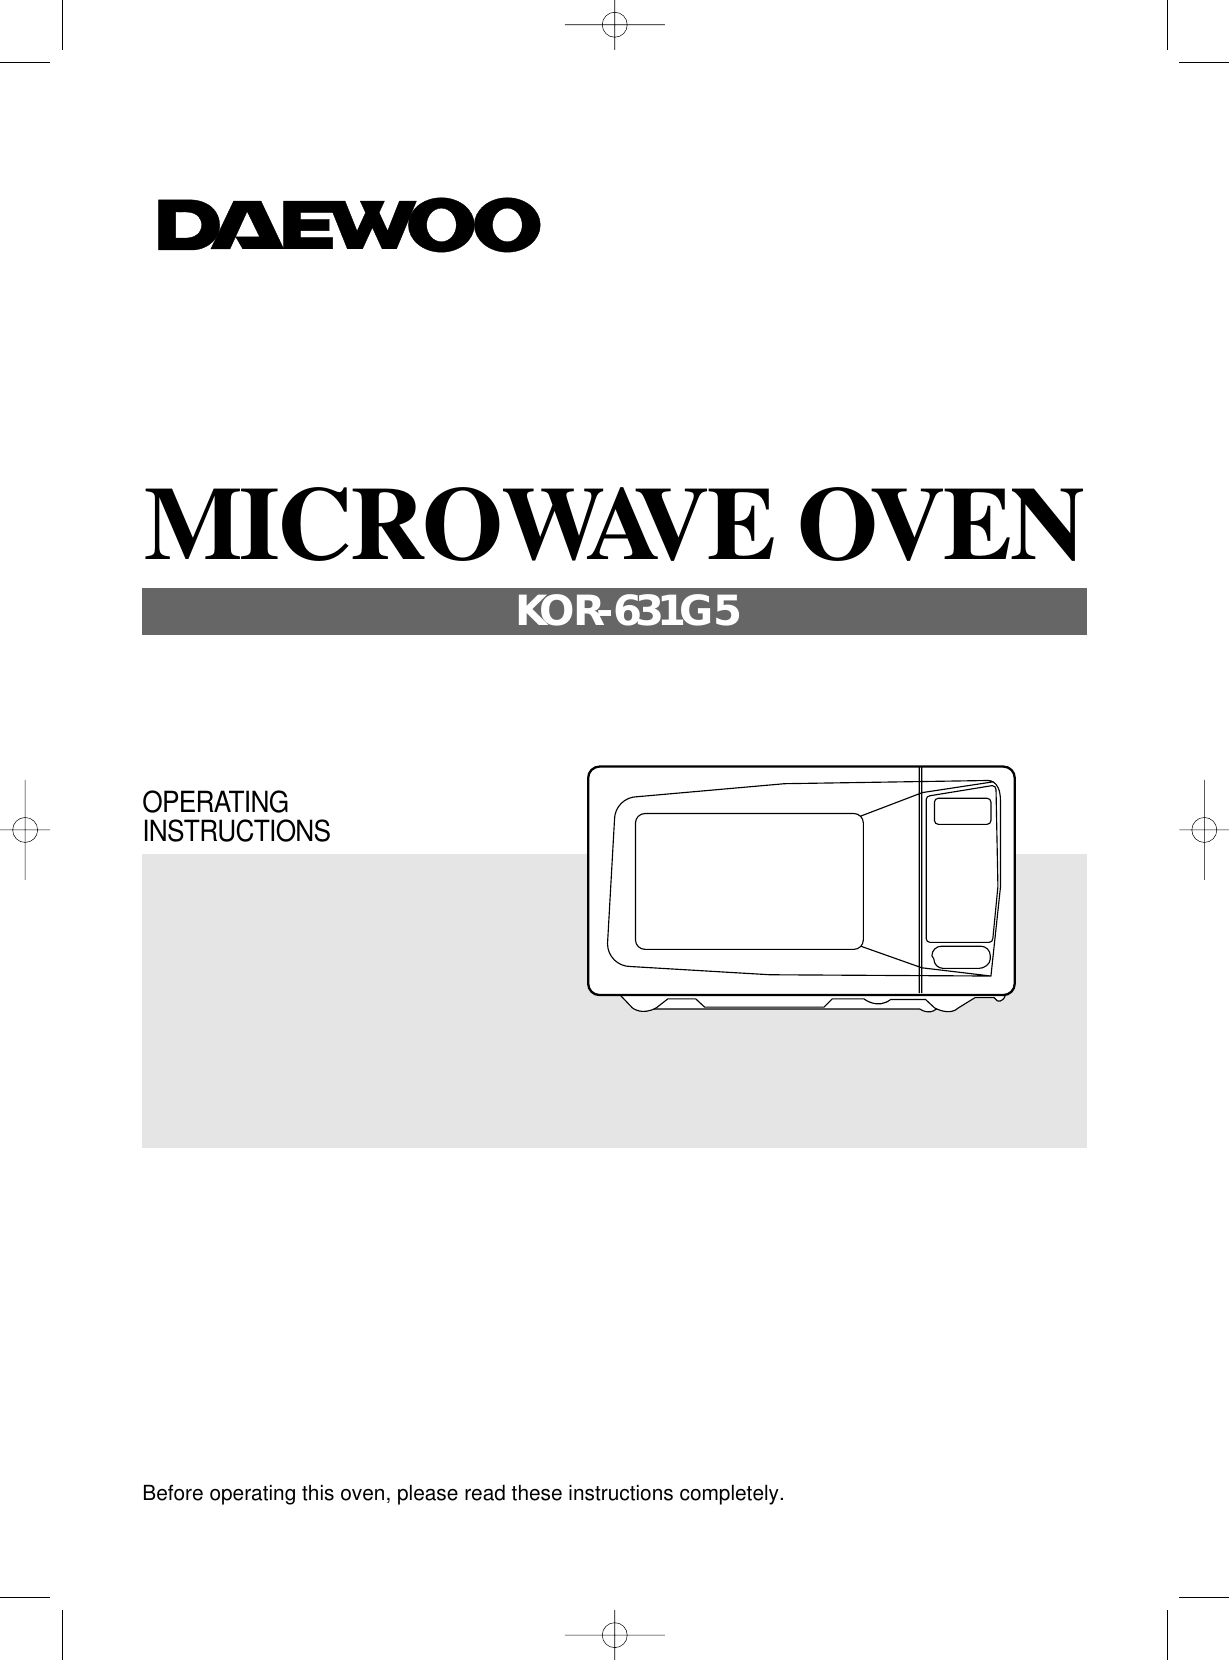 Before operating this oven, please read these instructions completely.OPERATINGINSTRUCTIONSMICROWAVE OVENKOR-631G5